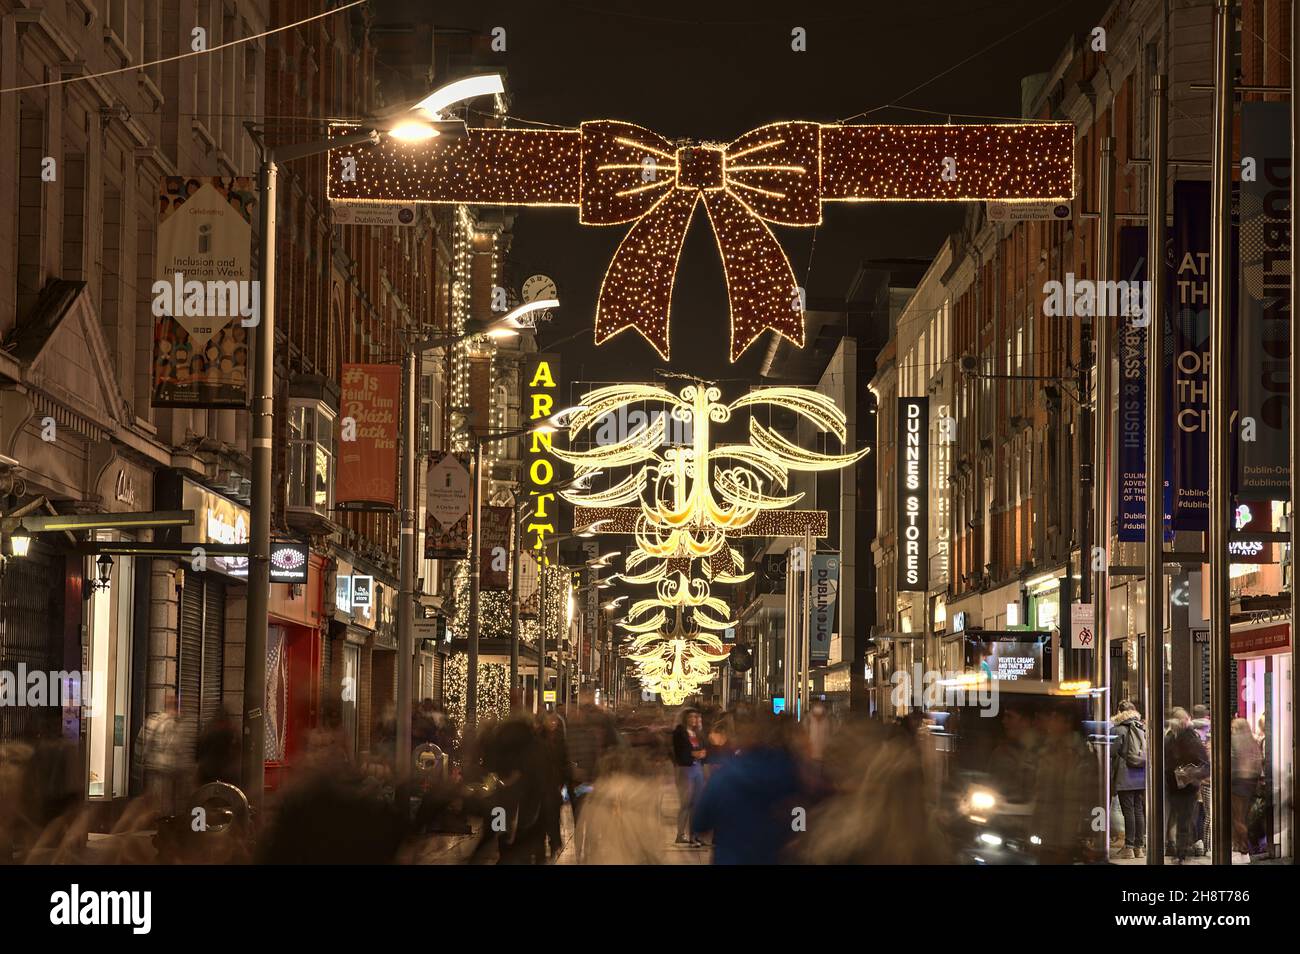 Dublin, Ireland - November 13, 2021: Beautiful view of festive Christmas lights and decorated Arnotts store on busy Henry Street during COVID-19 Stock Photo